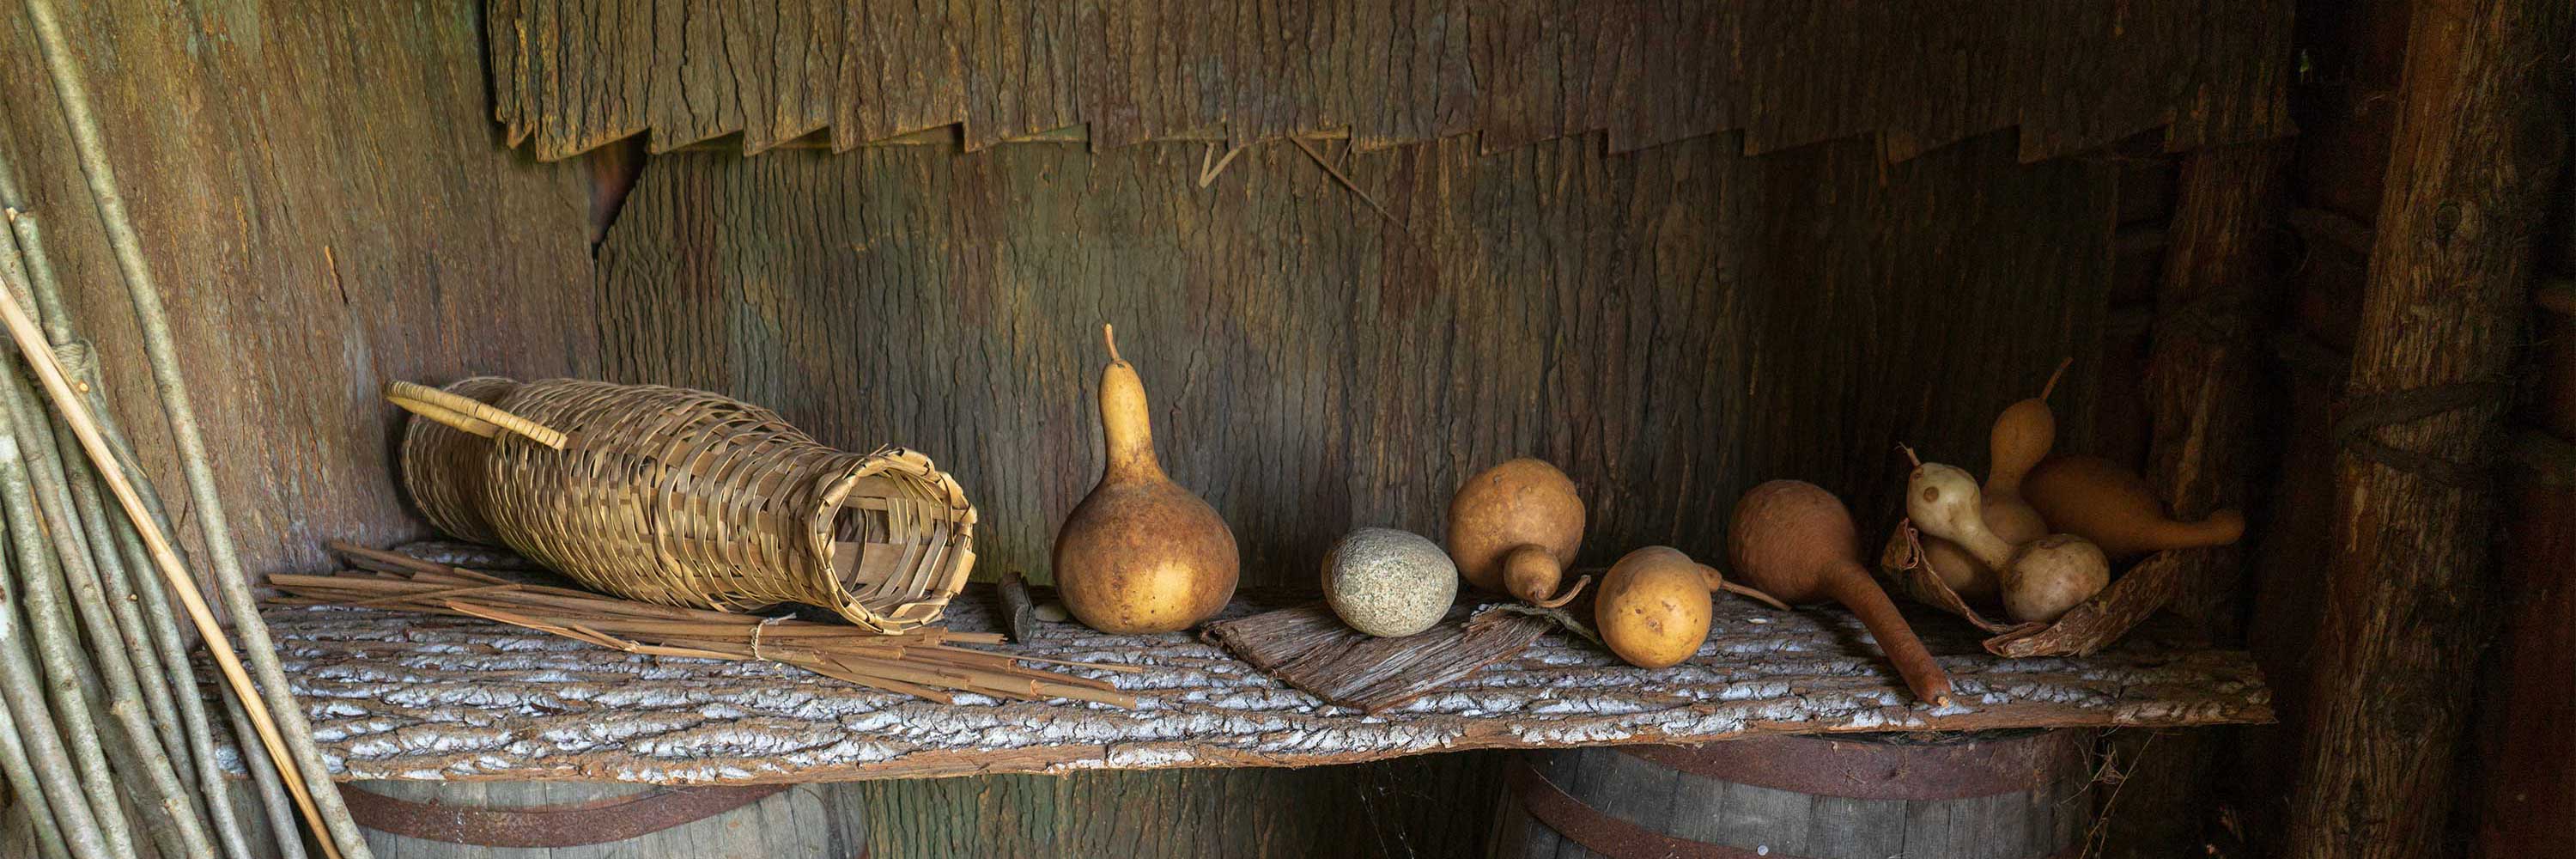 A photo of wicker and gourds